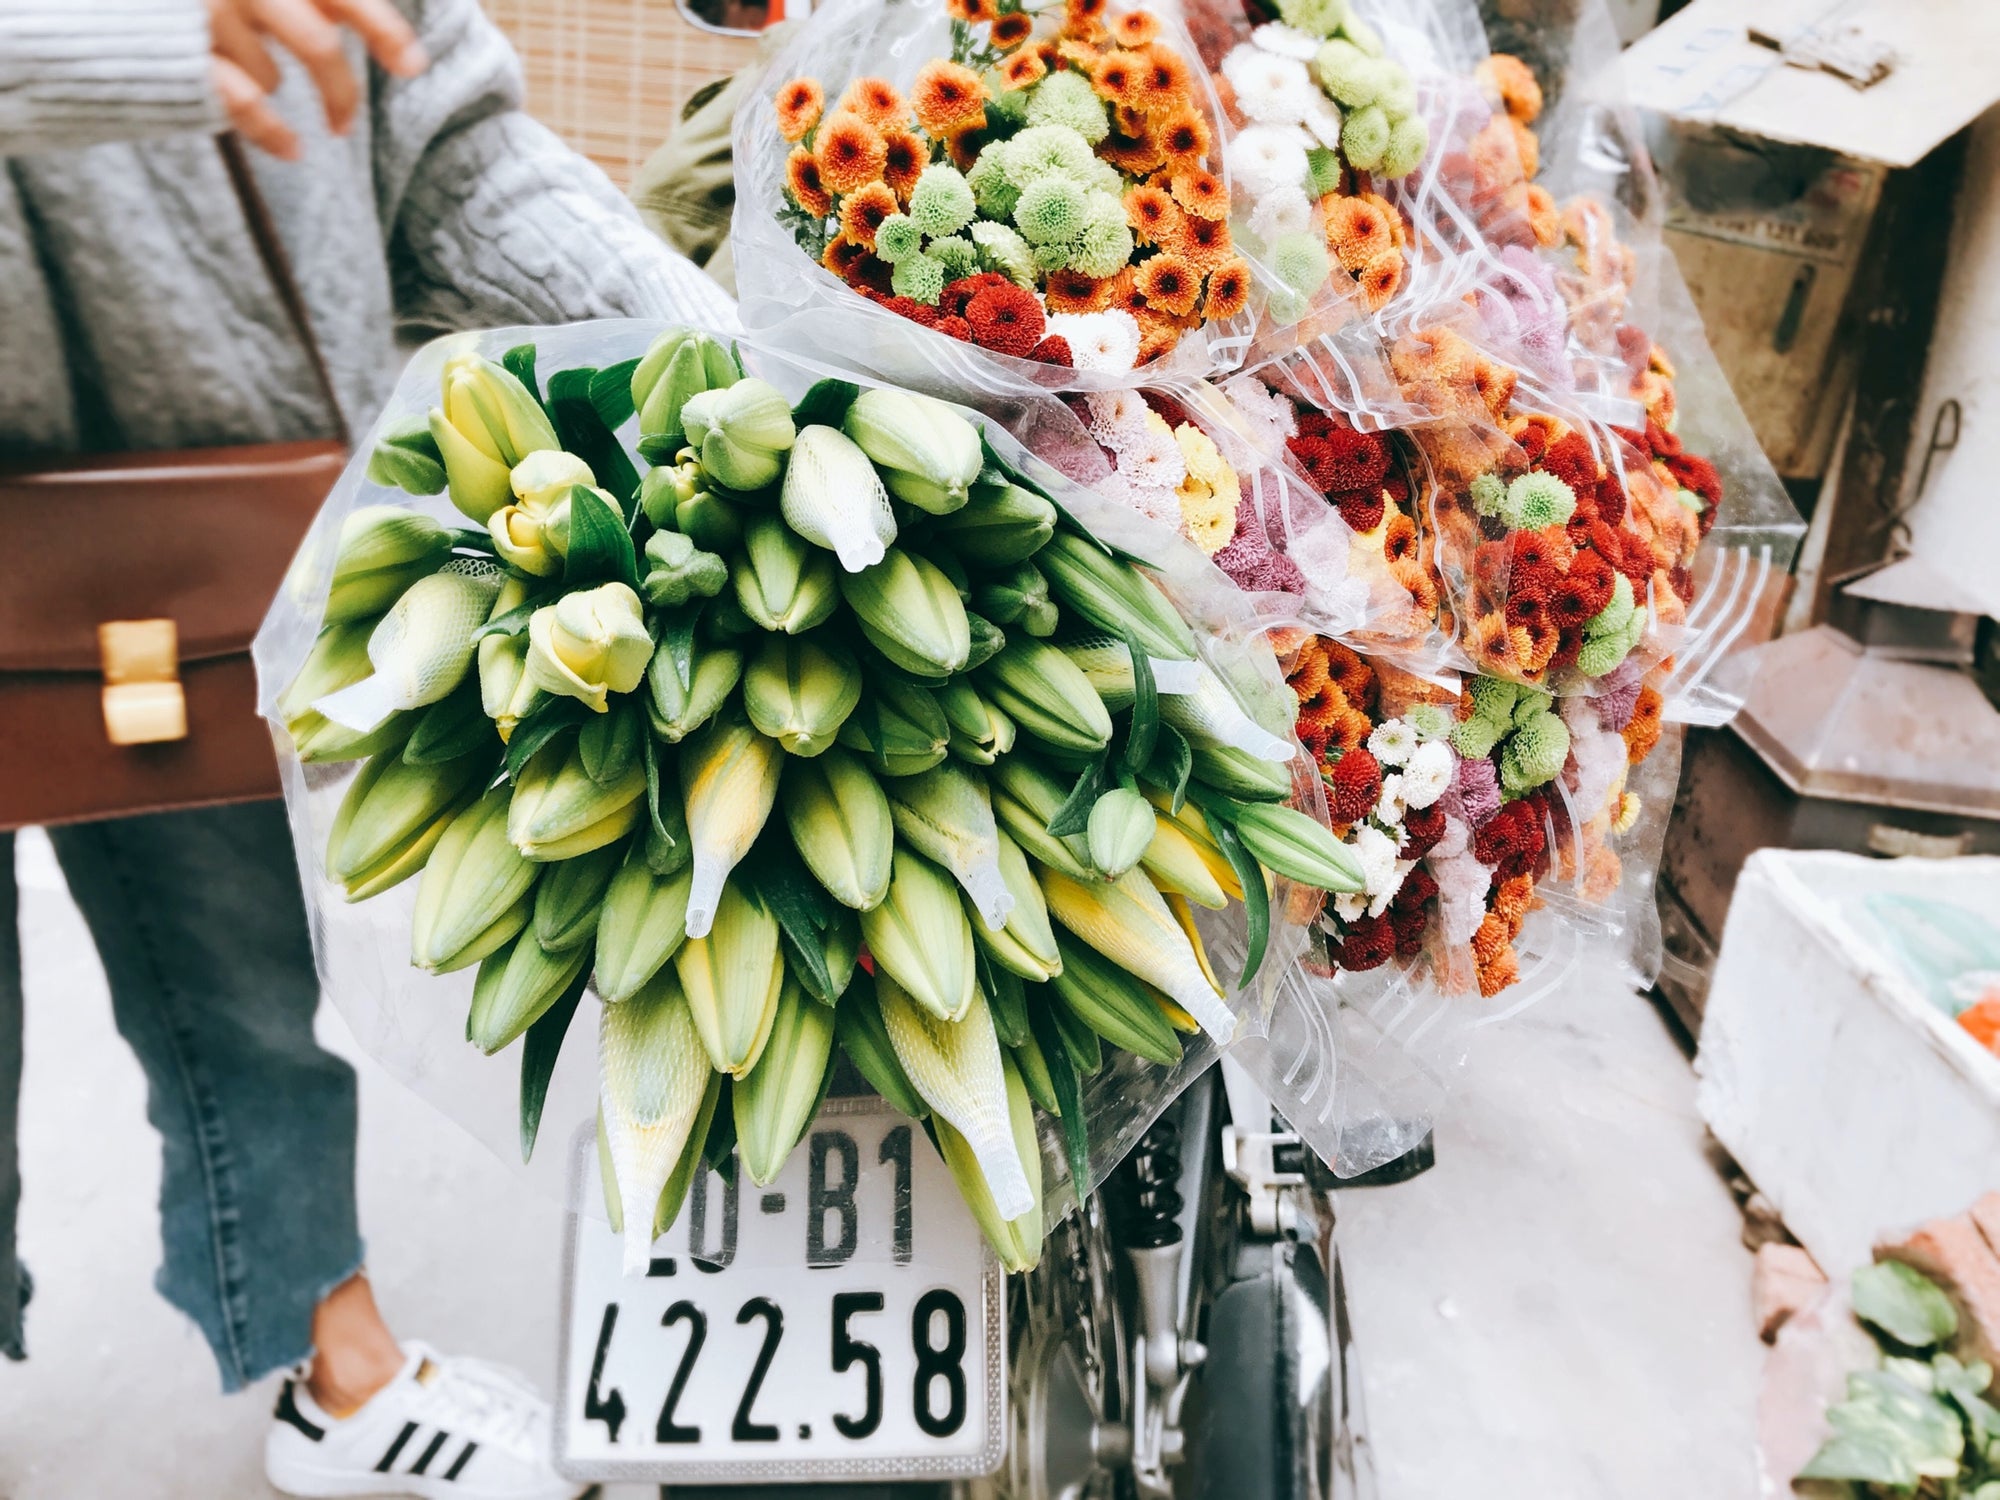 How To Choose The Best Flower Delivery Service?